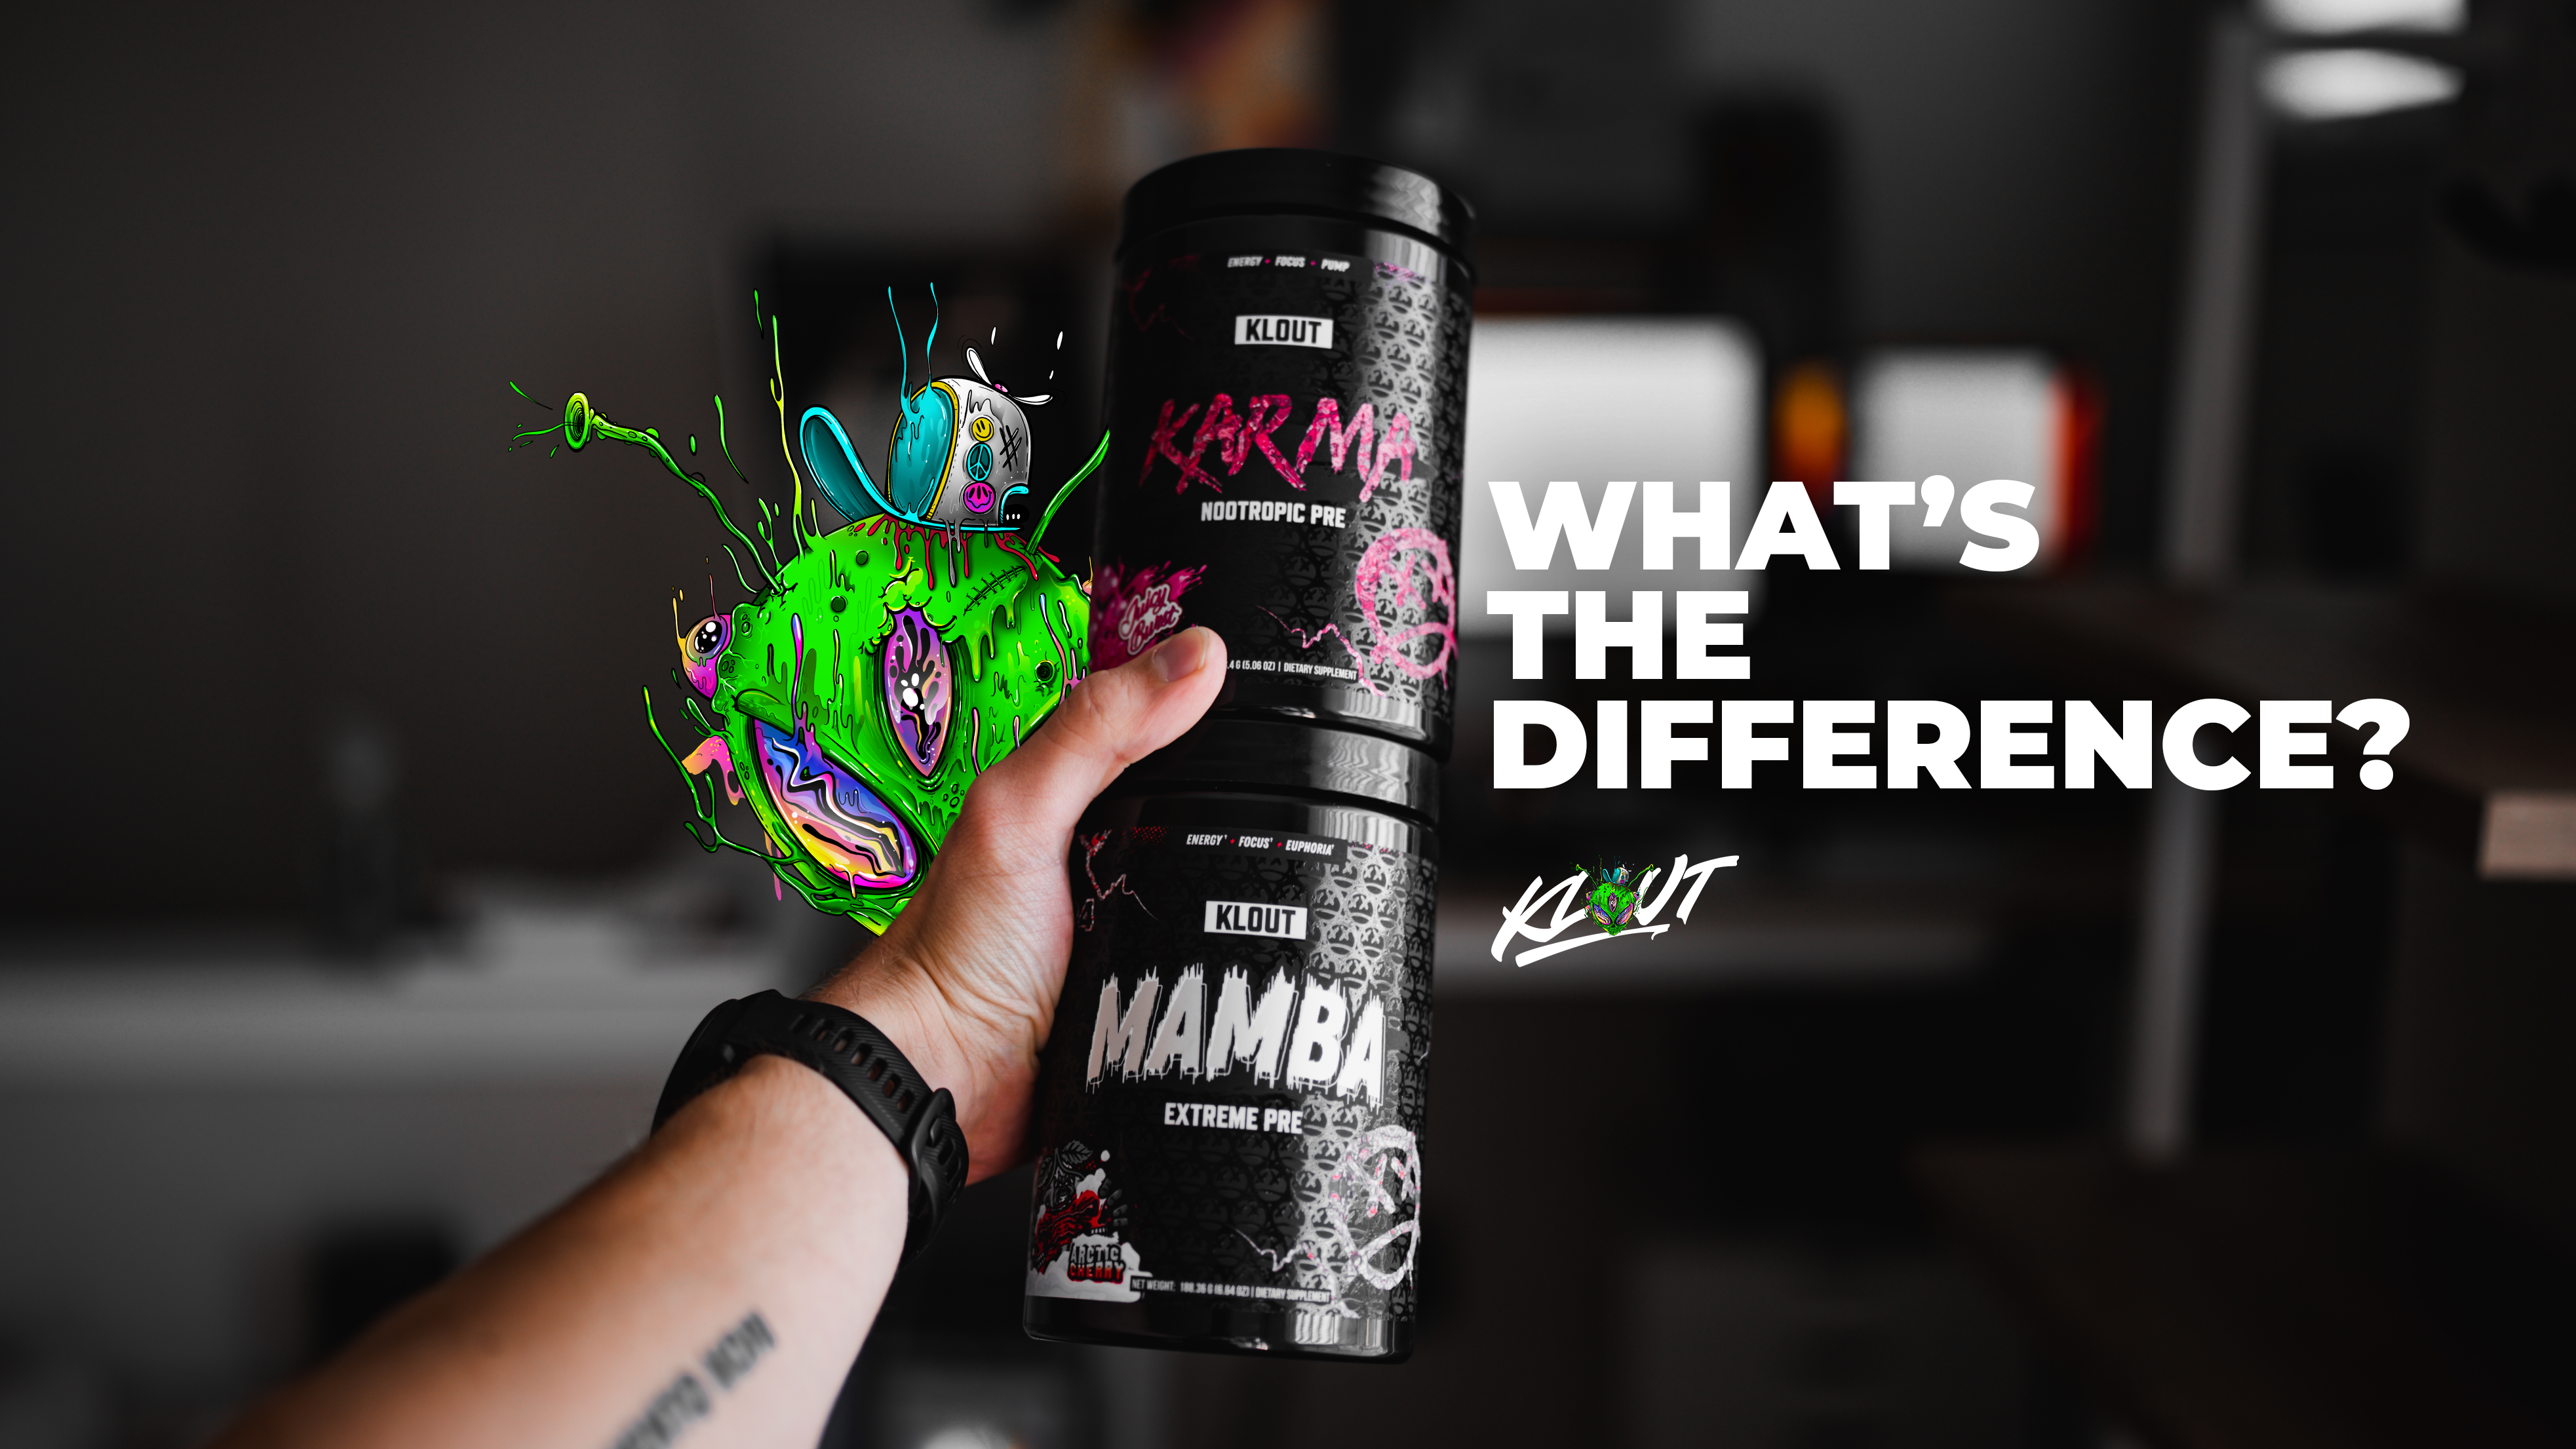 Mamba v.s. Karma - What's the Difference?